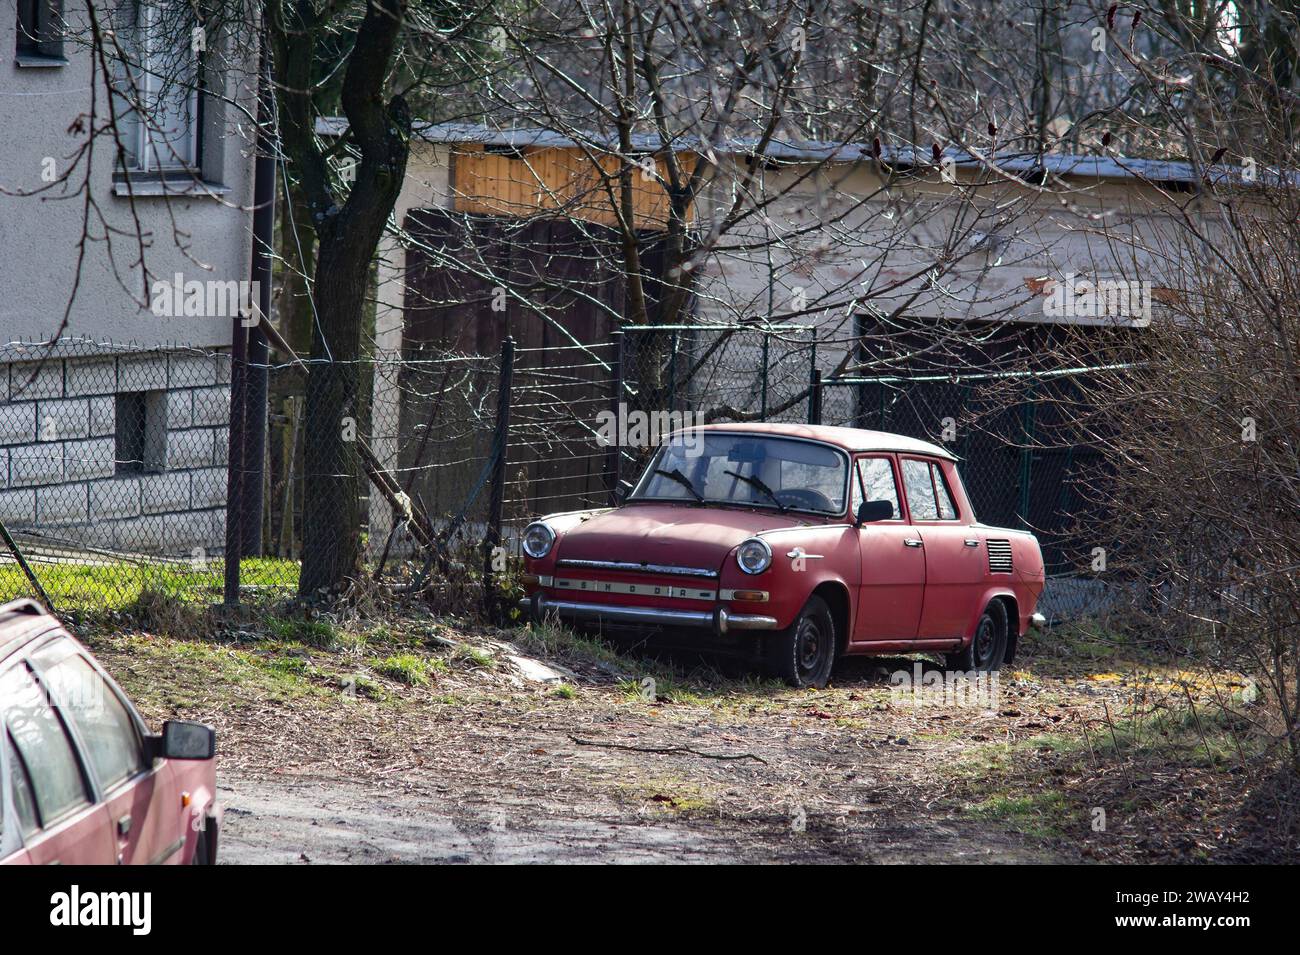 SENOV, CZECH REPUBLIC - FEBRUARY 7, 2016: Wreck of red facelifted Skoda 1000 MB made in 1969 Stock Photo